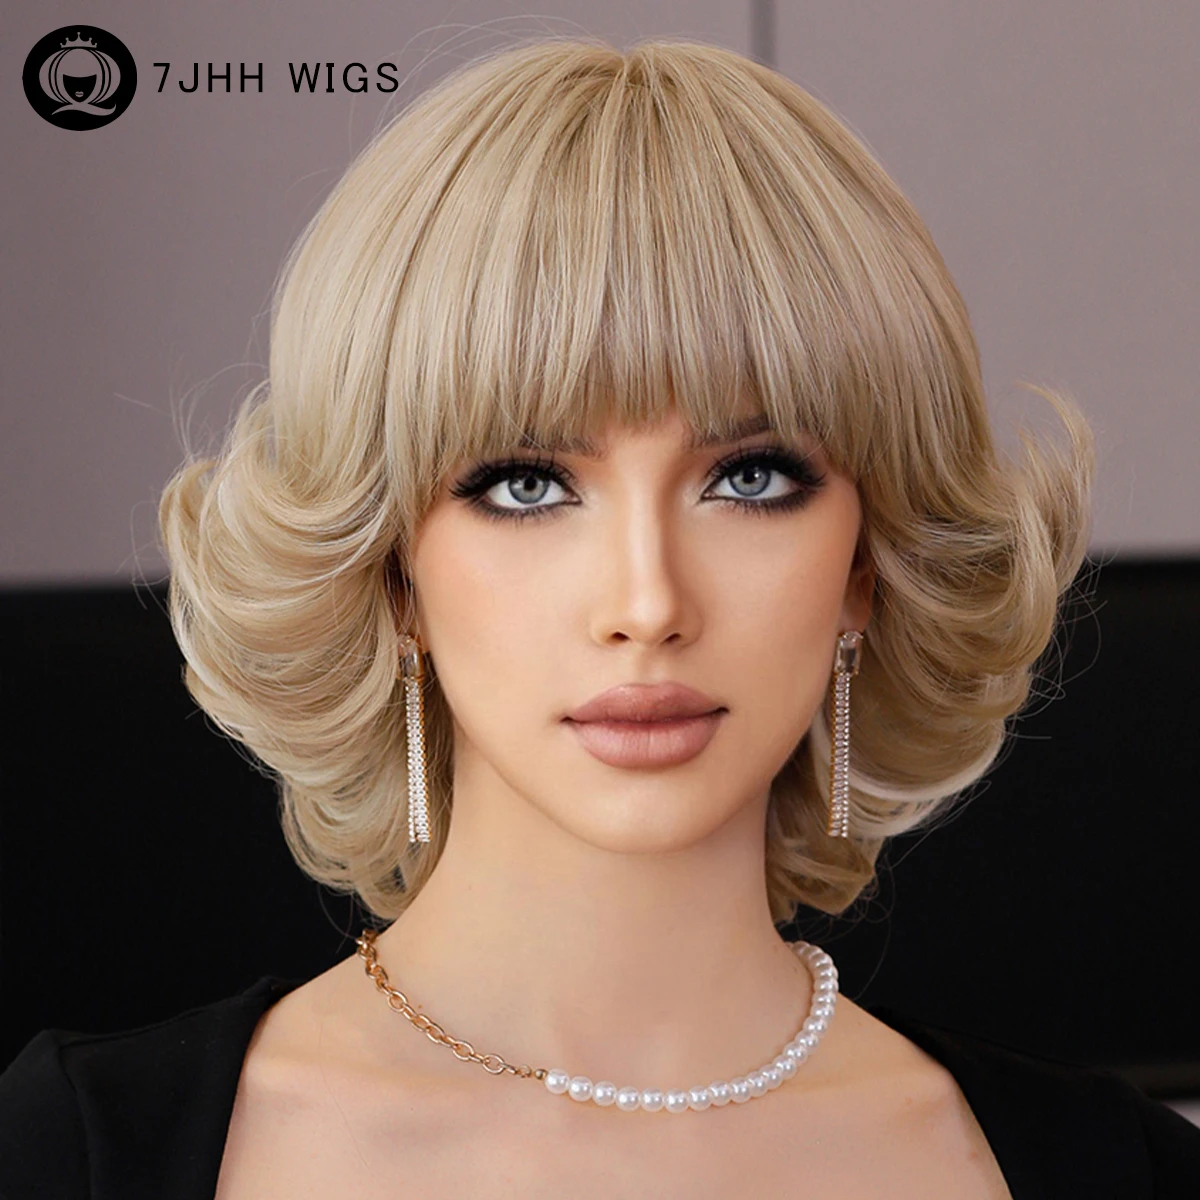 

European Style Noble Wig with Bangs Highlight Blonde Wigs Natural Looking Short Pixie Cut Layered Wavy Wigs for Women